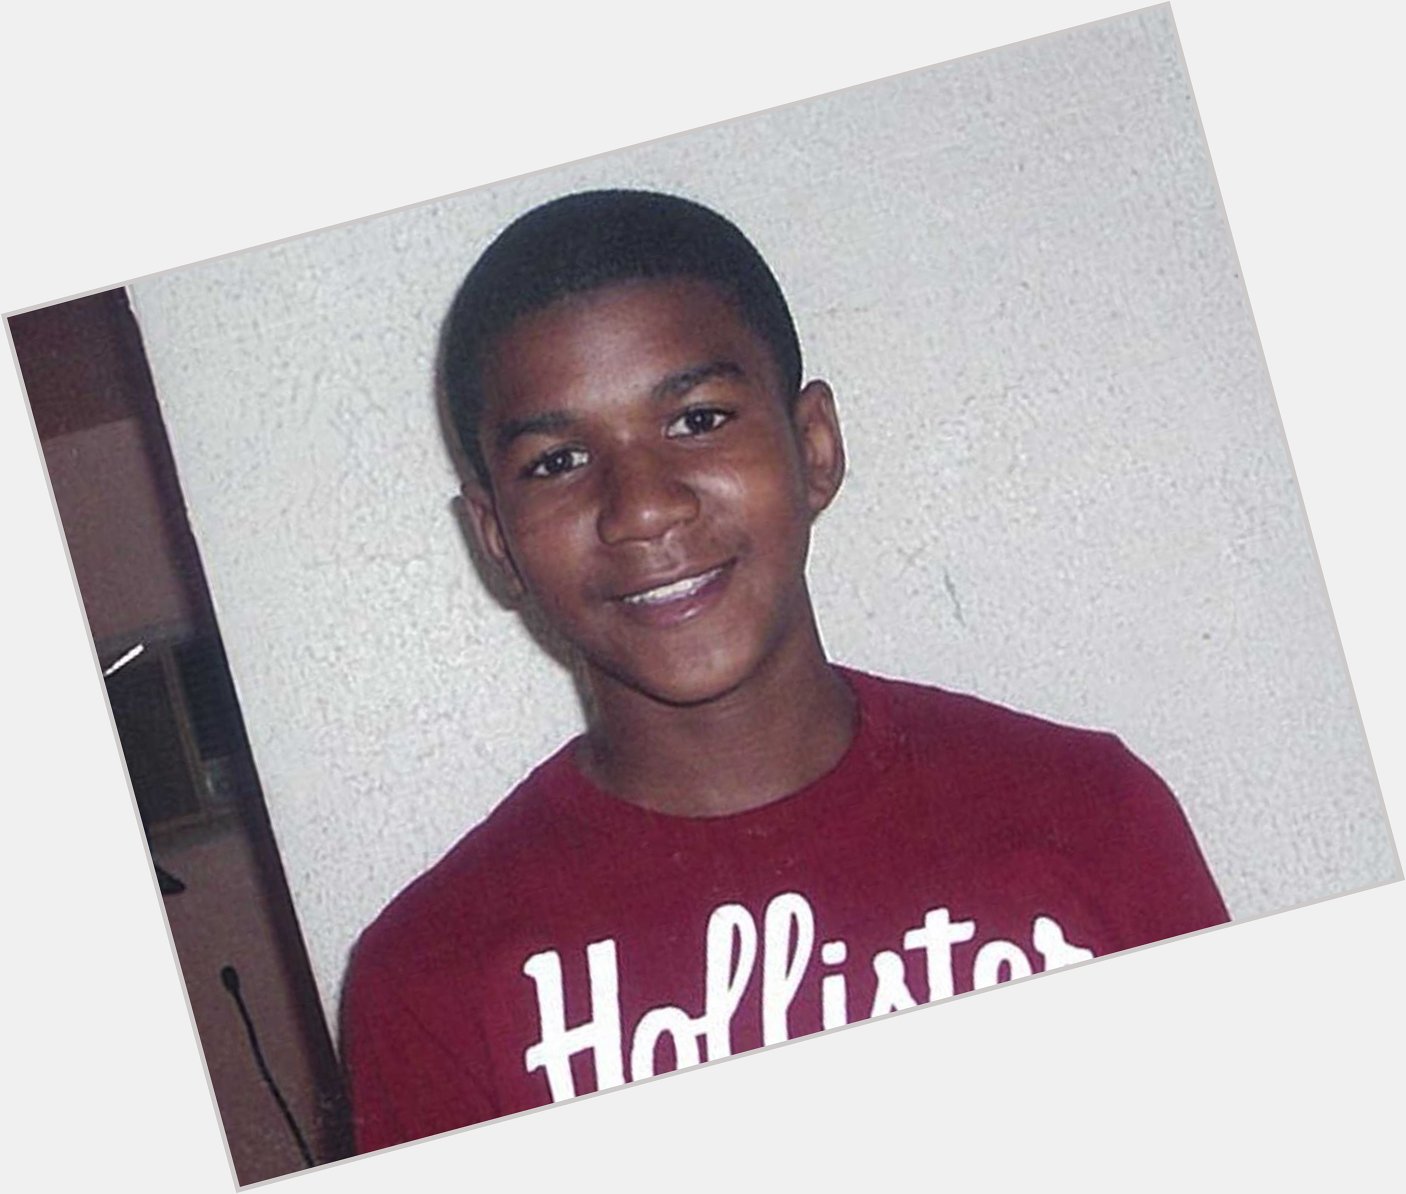 Happy Birthday and rip Trayvon Martin because justice 4 young african american men of color needs 2 exercised everydy 